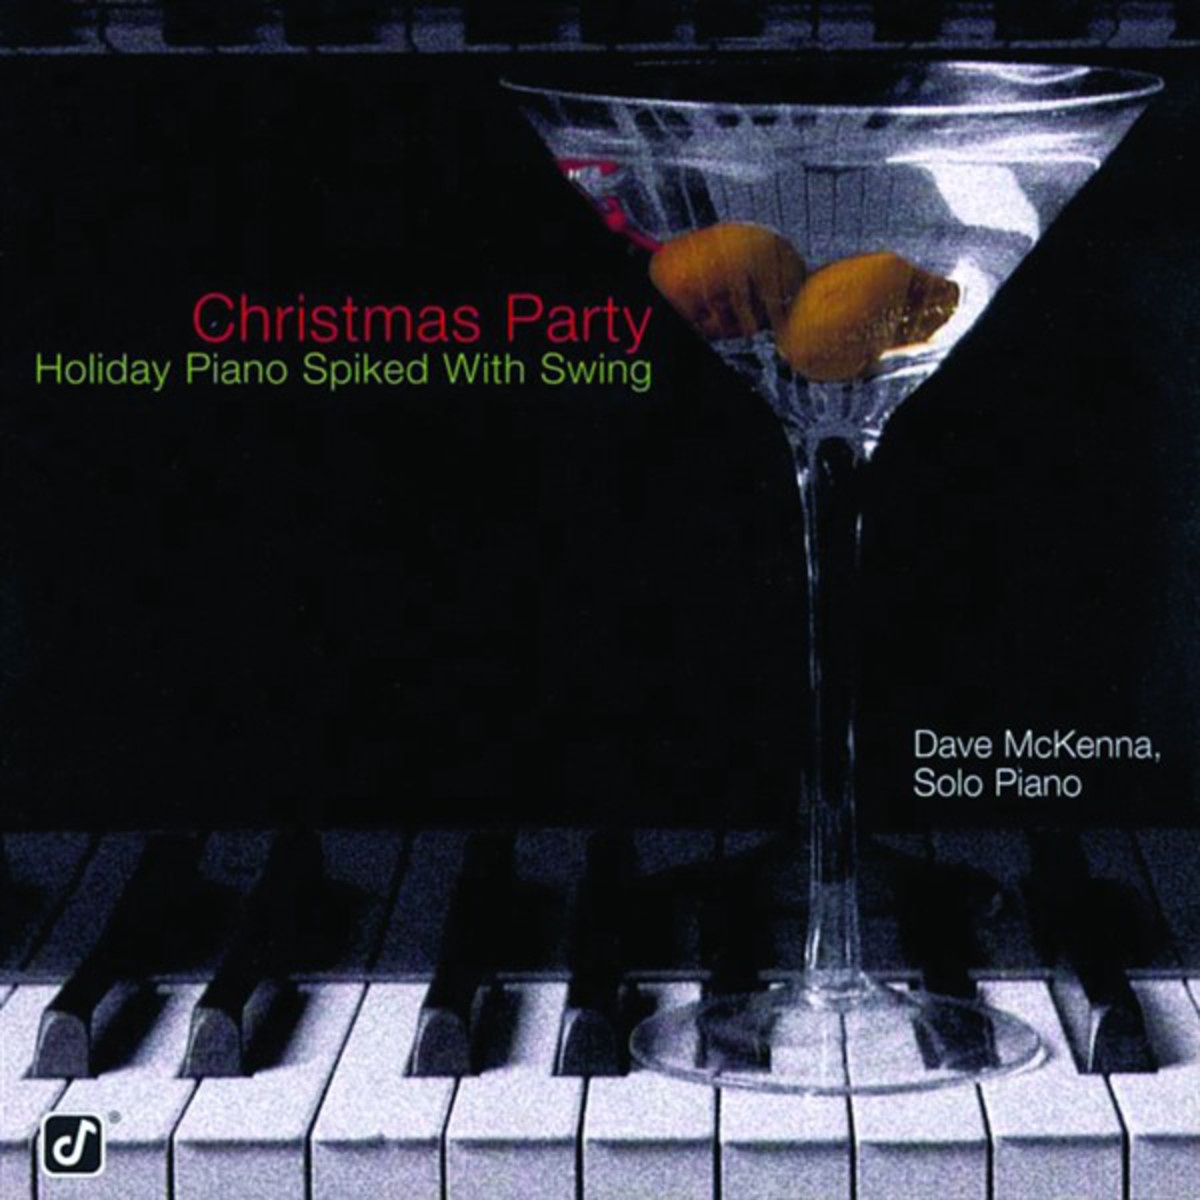 Christmas Party - Holiday Piano Spiked With Swing